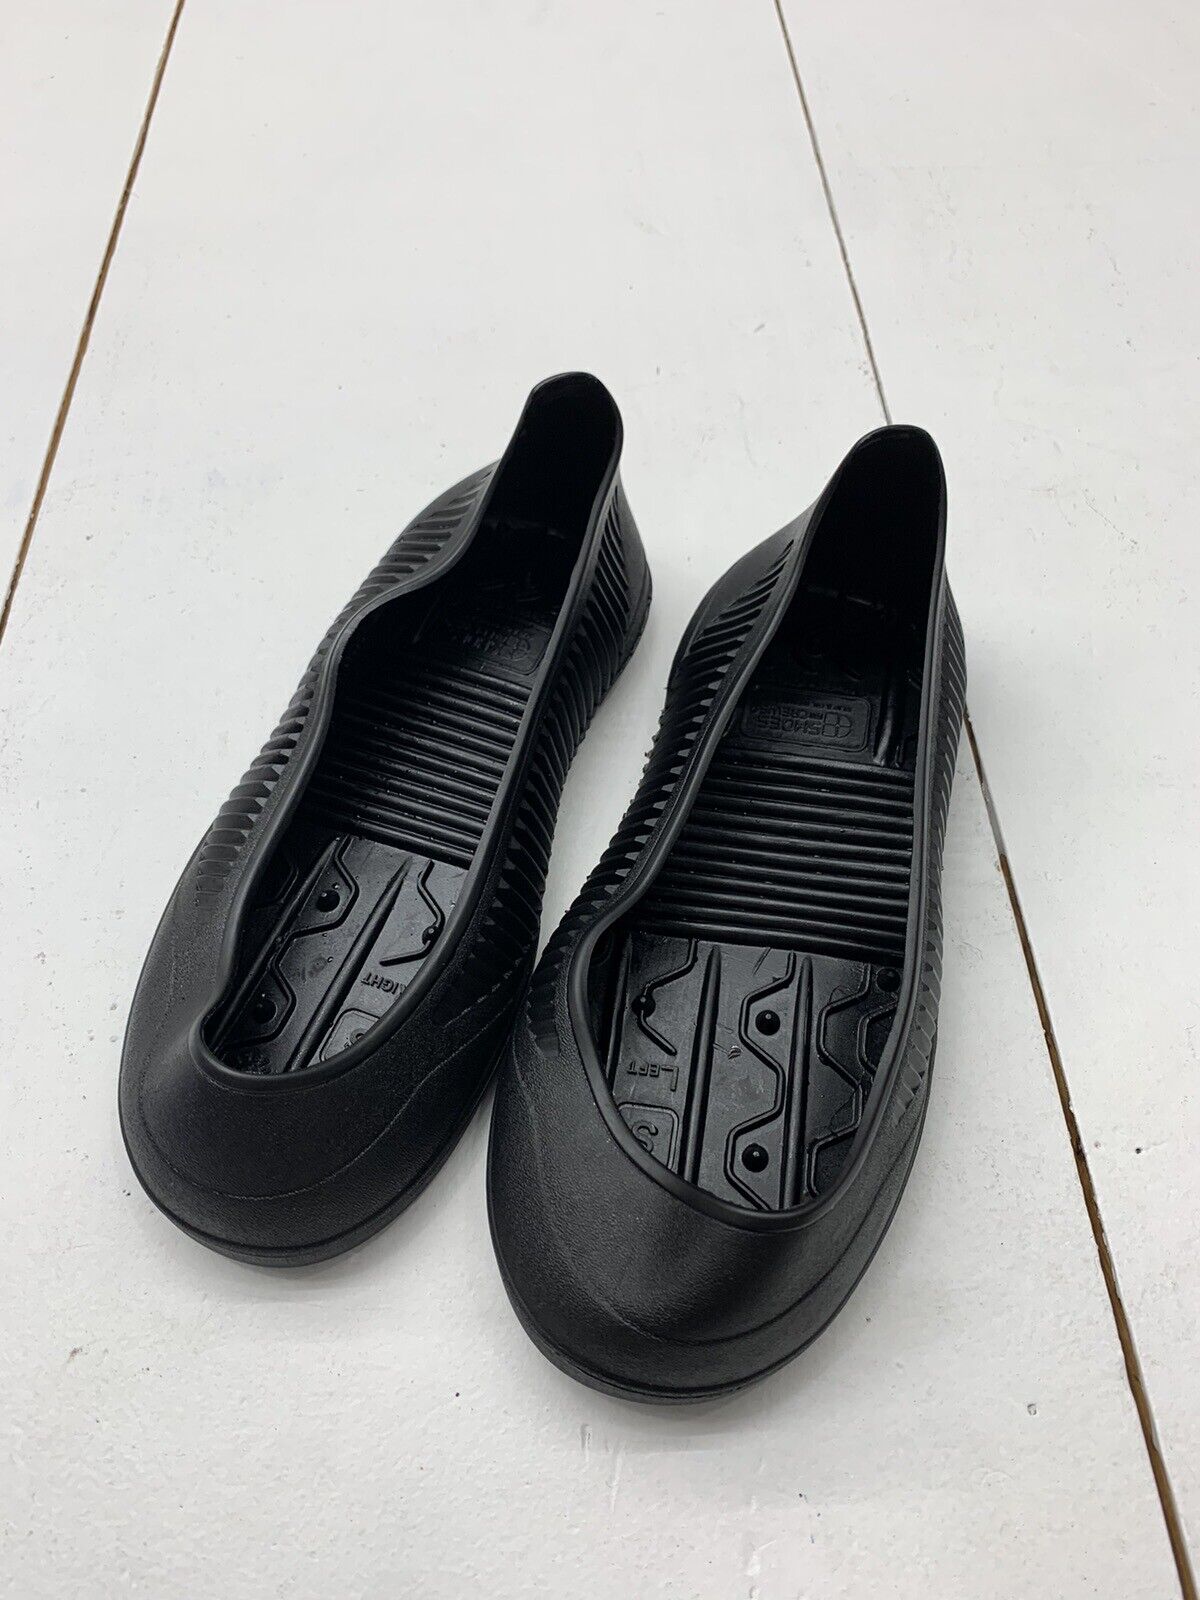 Silky Toes Womens Black Slip On Shoes Size Medium - beyond exchange